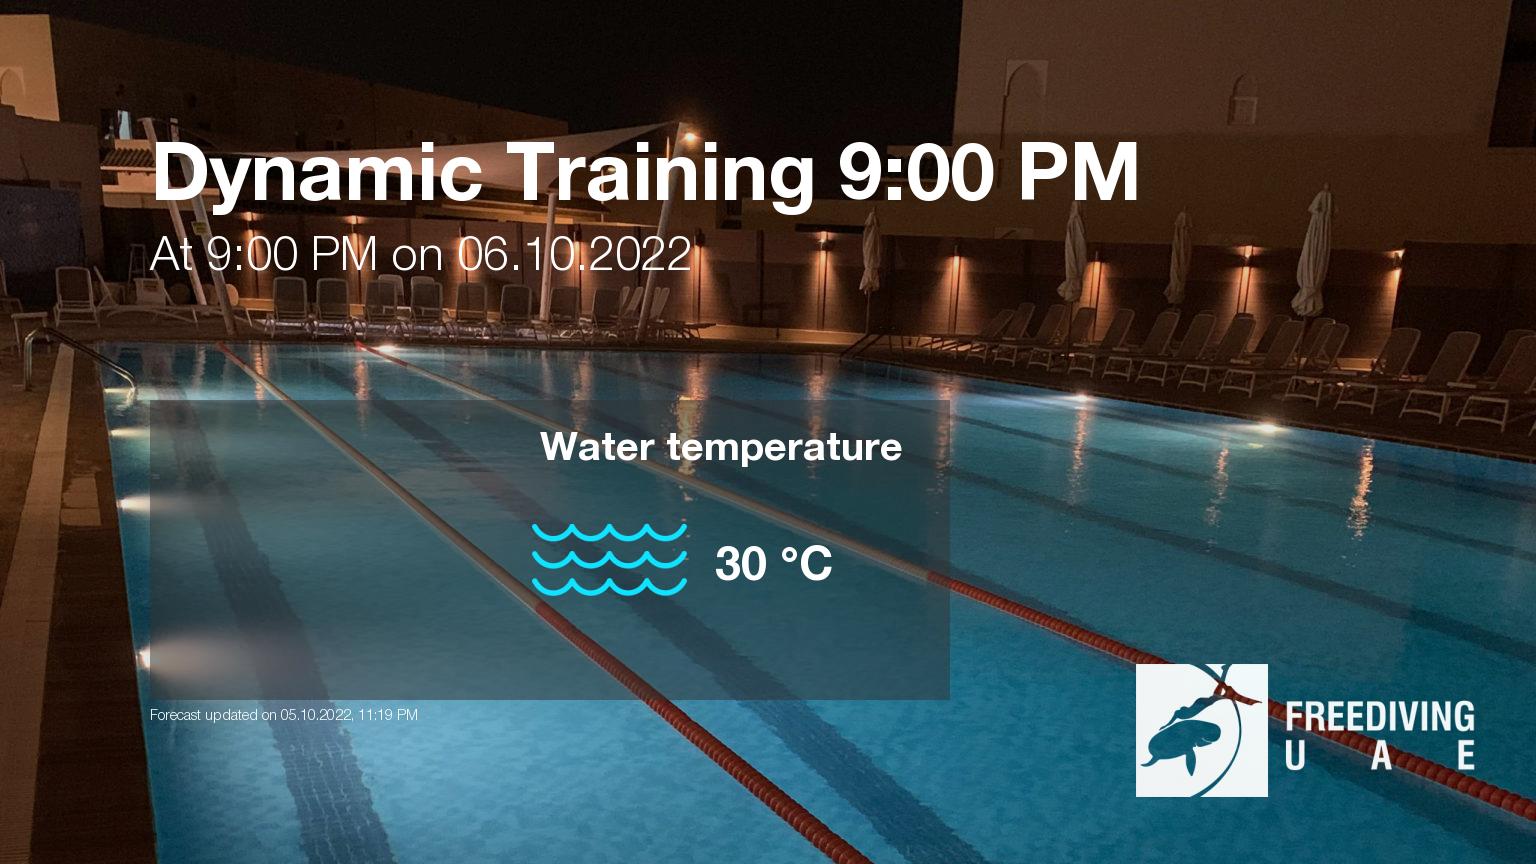 Expected weather during Dynamic Training 9:00 PM on Thu, Oct 6, at 9:00 PM